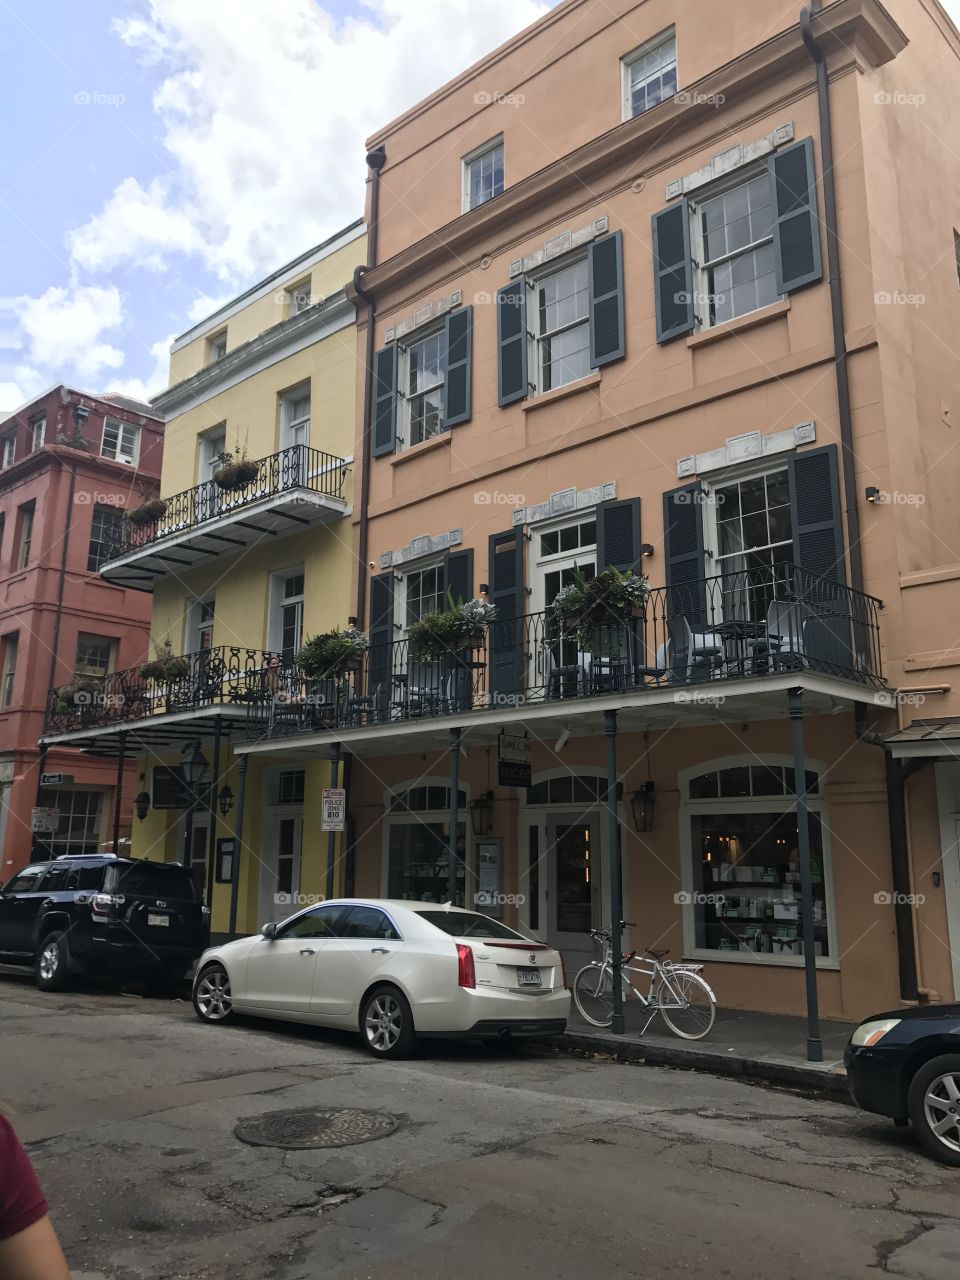 New Orleans Architecture 